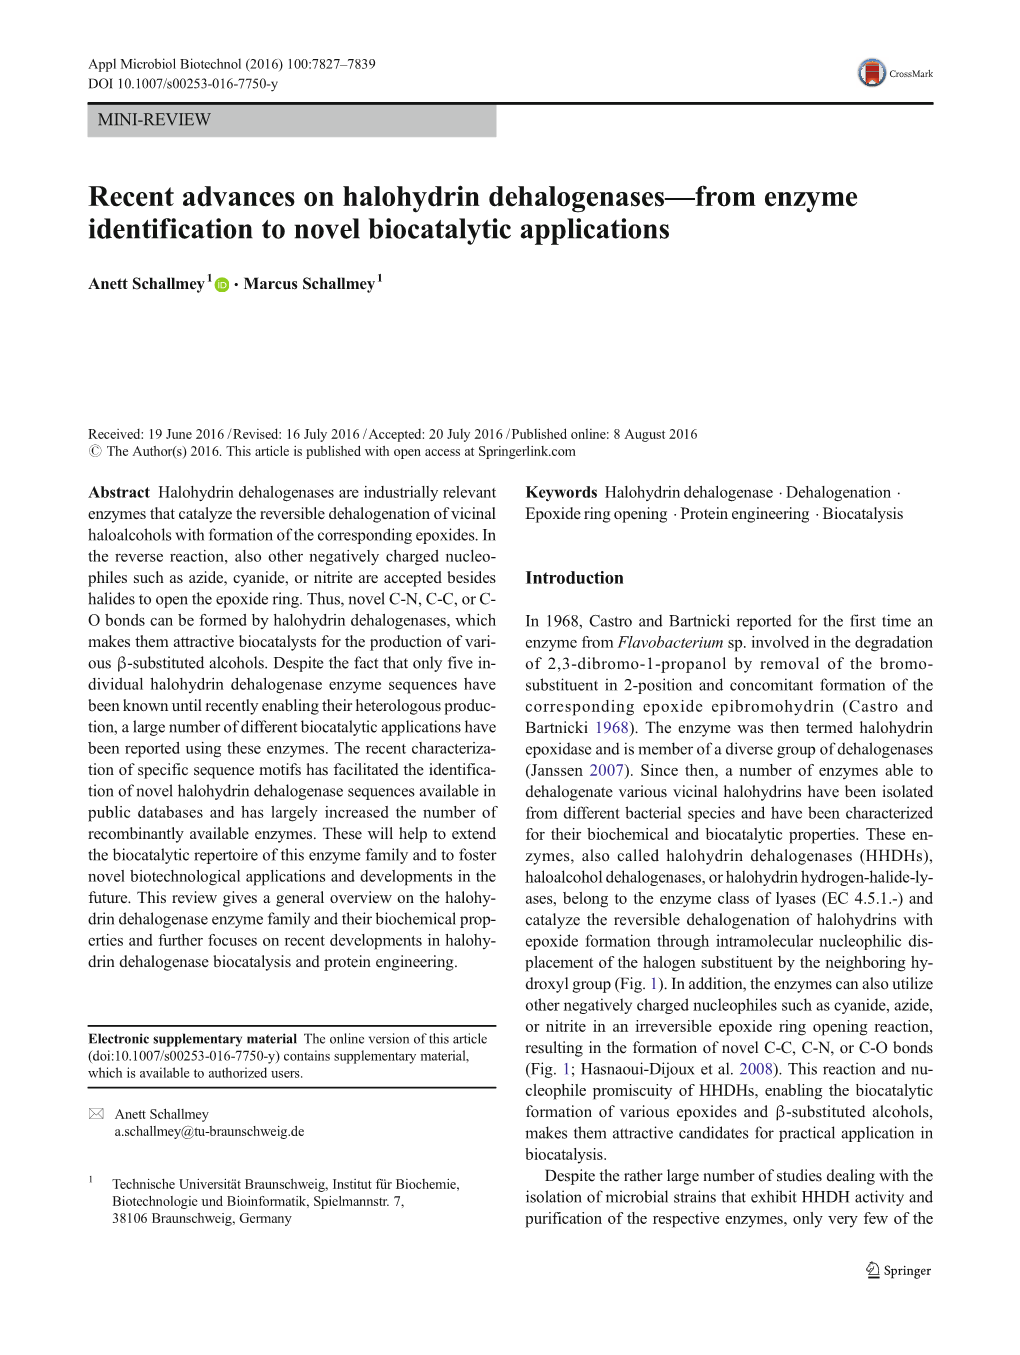 Recent Advances on Halohydrin Dehalogenases—From Enzyme Identification to Novel Biocatalytic Applications